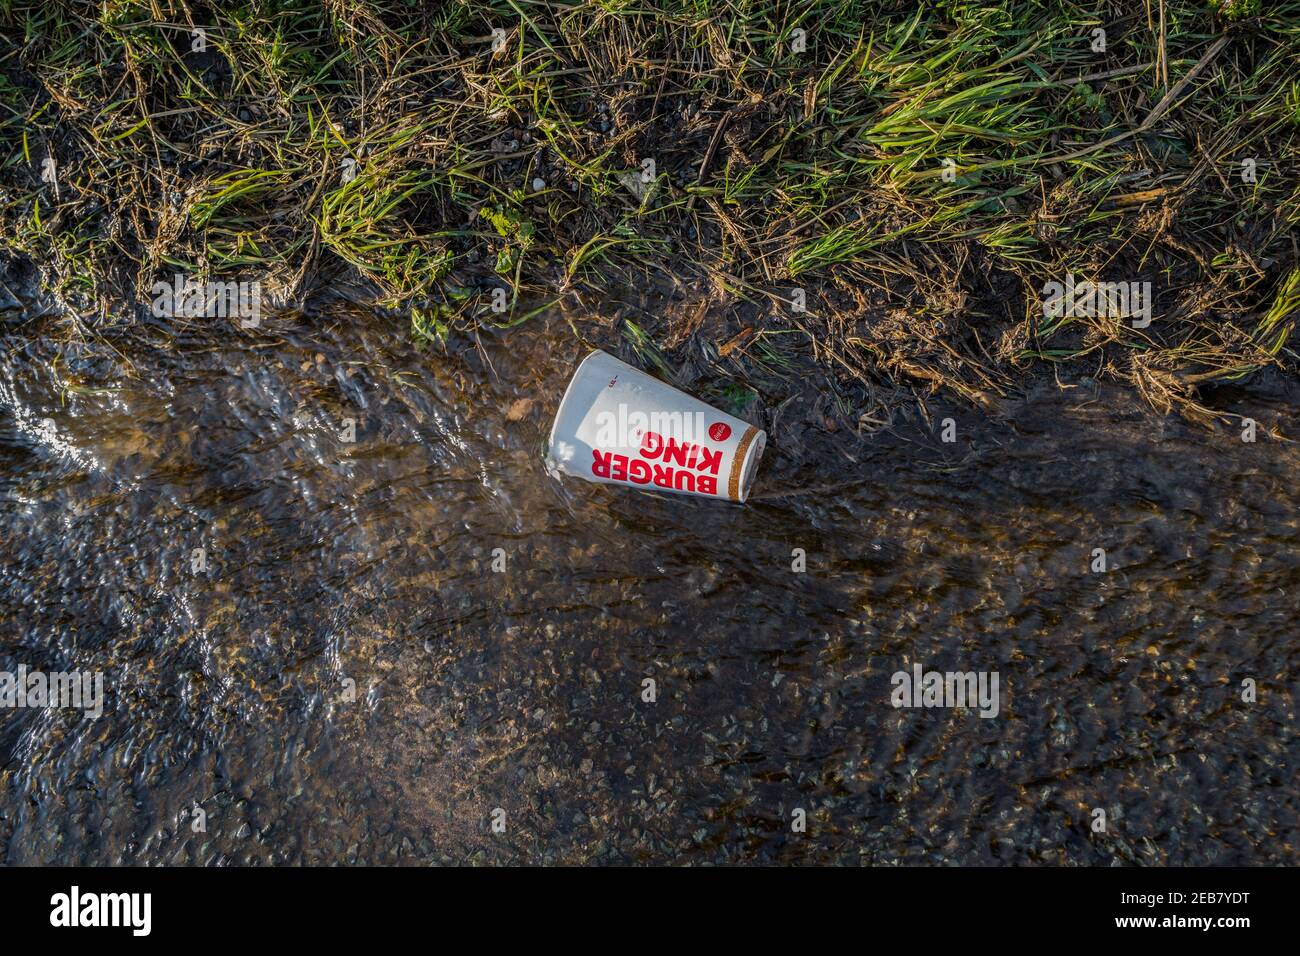 https://c8.alamy.com/comp/2EB7YDT/empty-burger-king-coca-cola-drinks-cup-floating-a-flooded-road-2EB7YDT.jpg